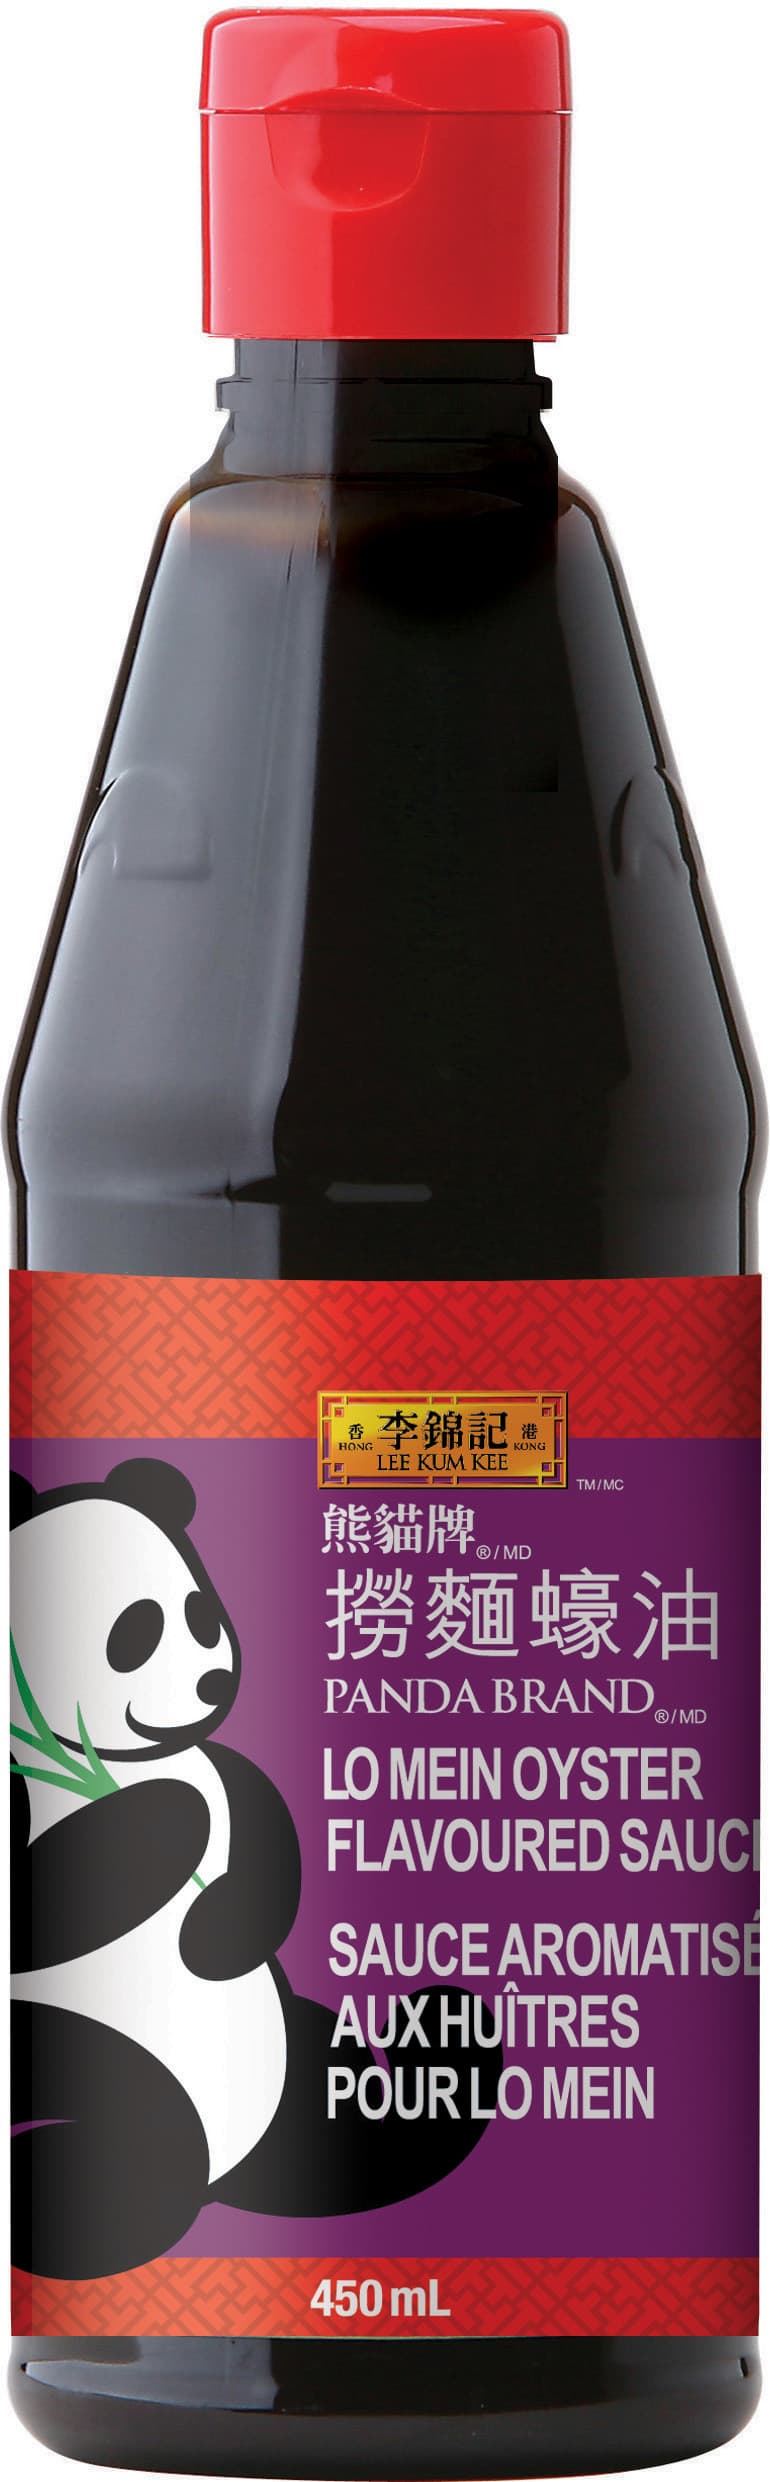 Panda Brand Lo Mein Oyster Flavoured Sauce 450ml 